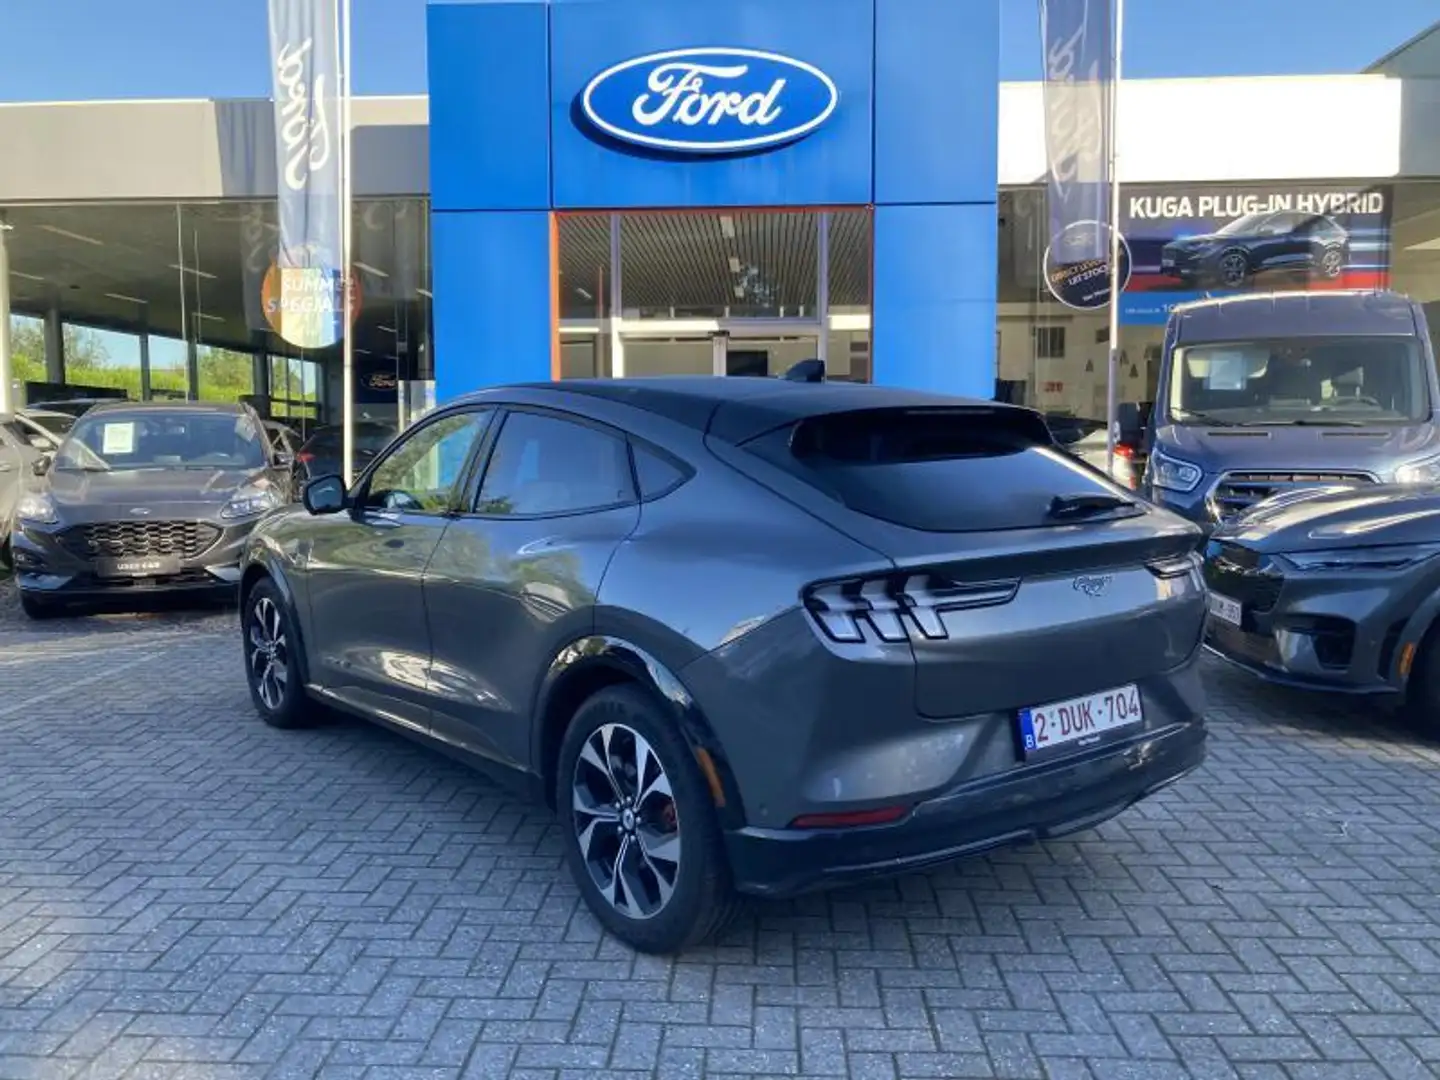 Ford Mustang Mach-E Premium RWD 99kWH|€599/m|Technology Pack|600 Range Gris - 2